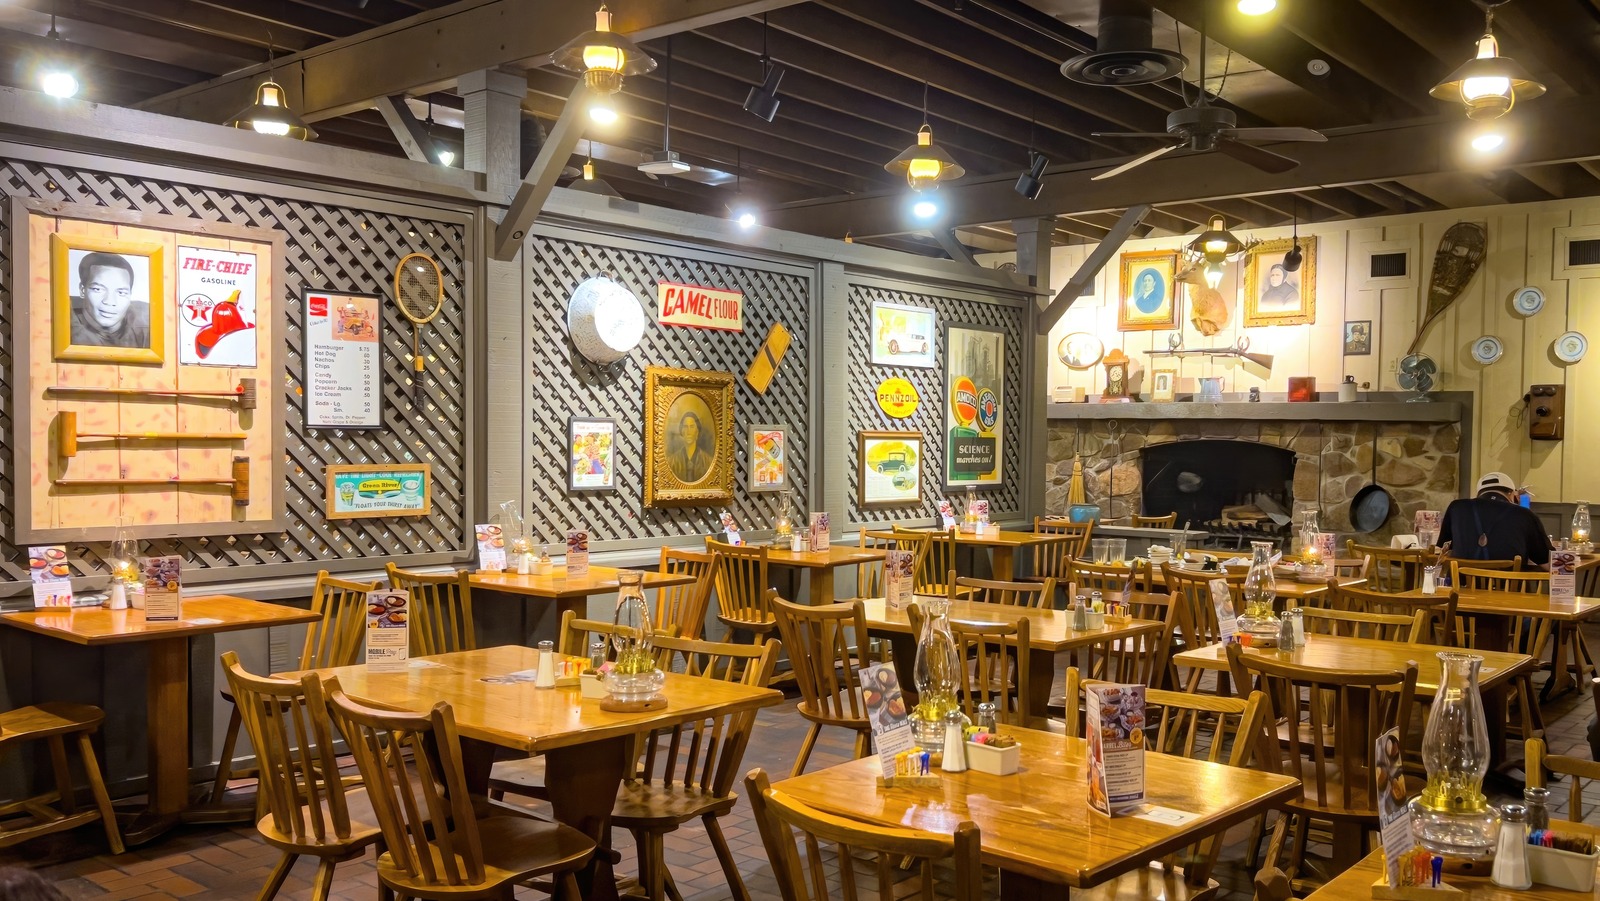 In Case You Didn't Know, Here's What 'Cracker Barrel' Actually Means